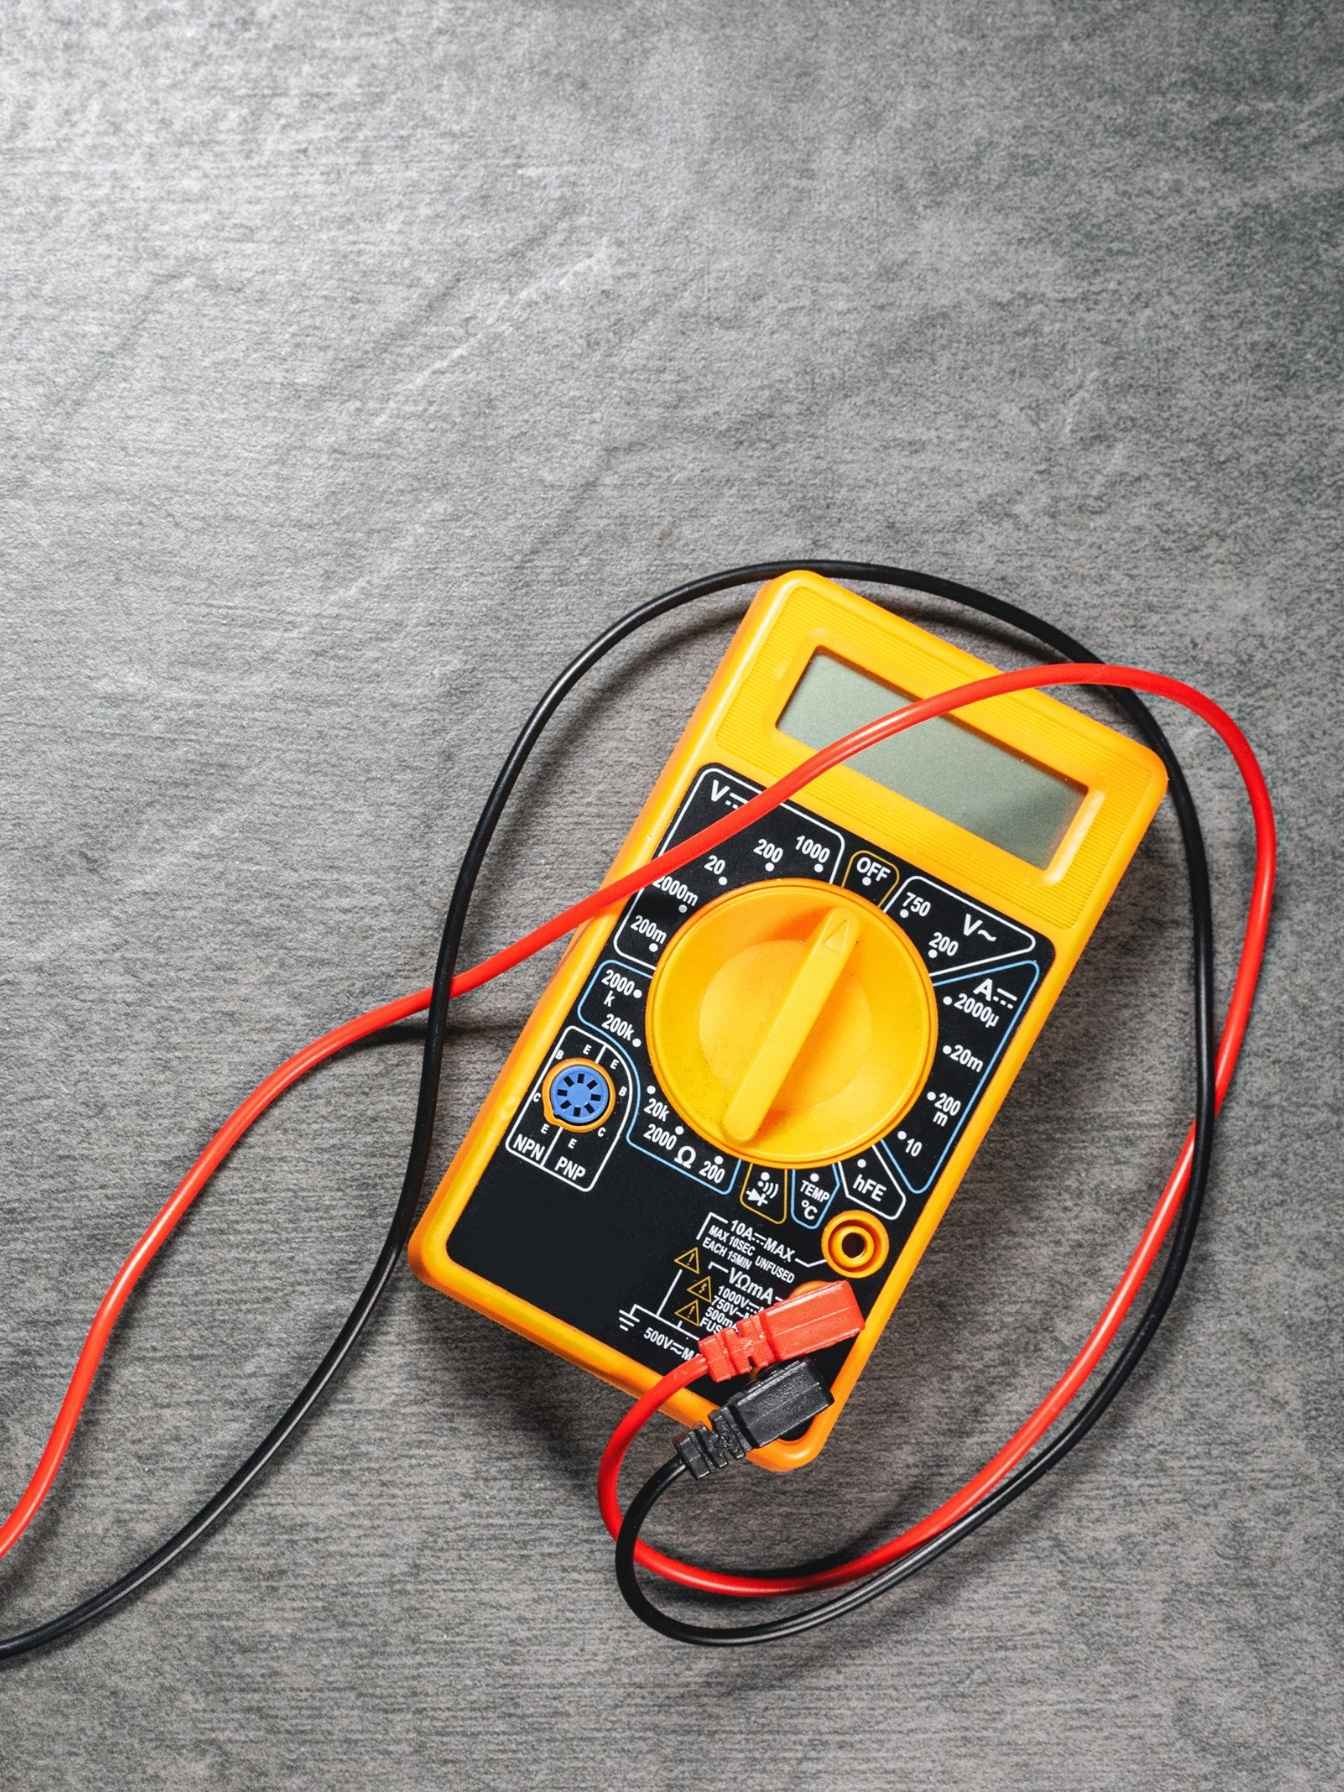 A brightly coloured multimeter with probes